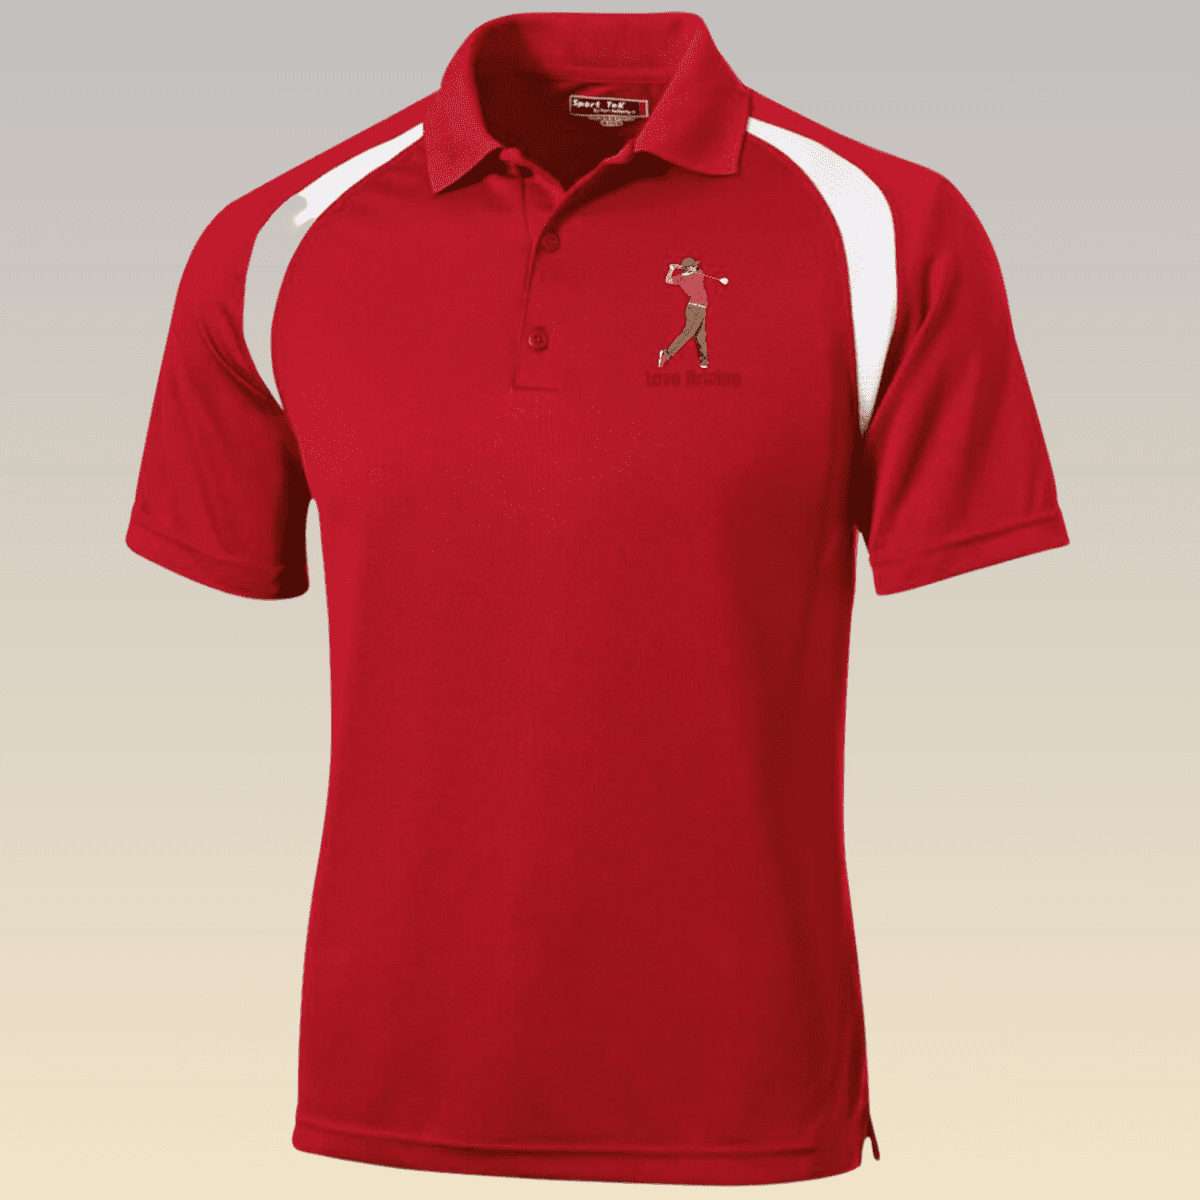 Men's Red and White Golf Love Driving Moisture-Wicking Polo Shirt